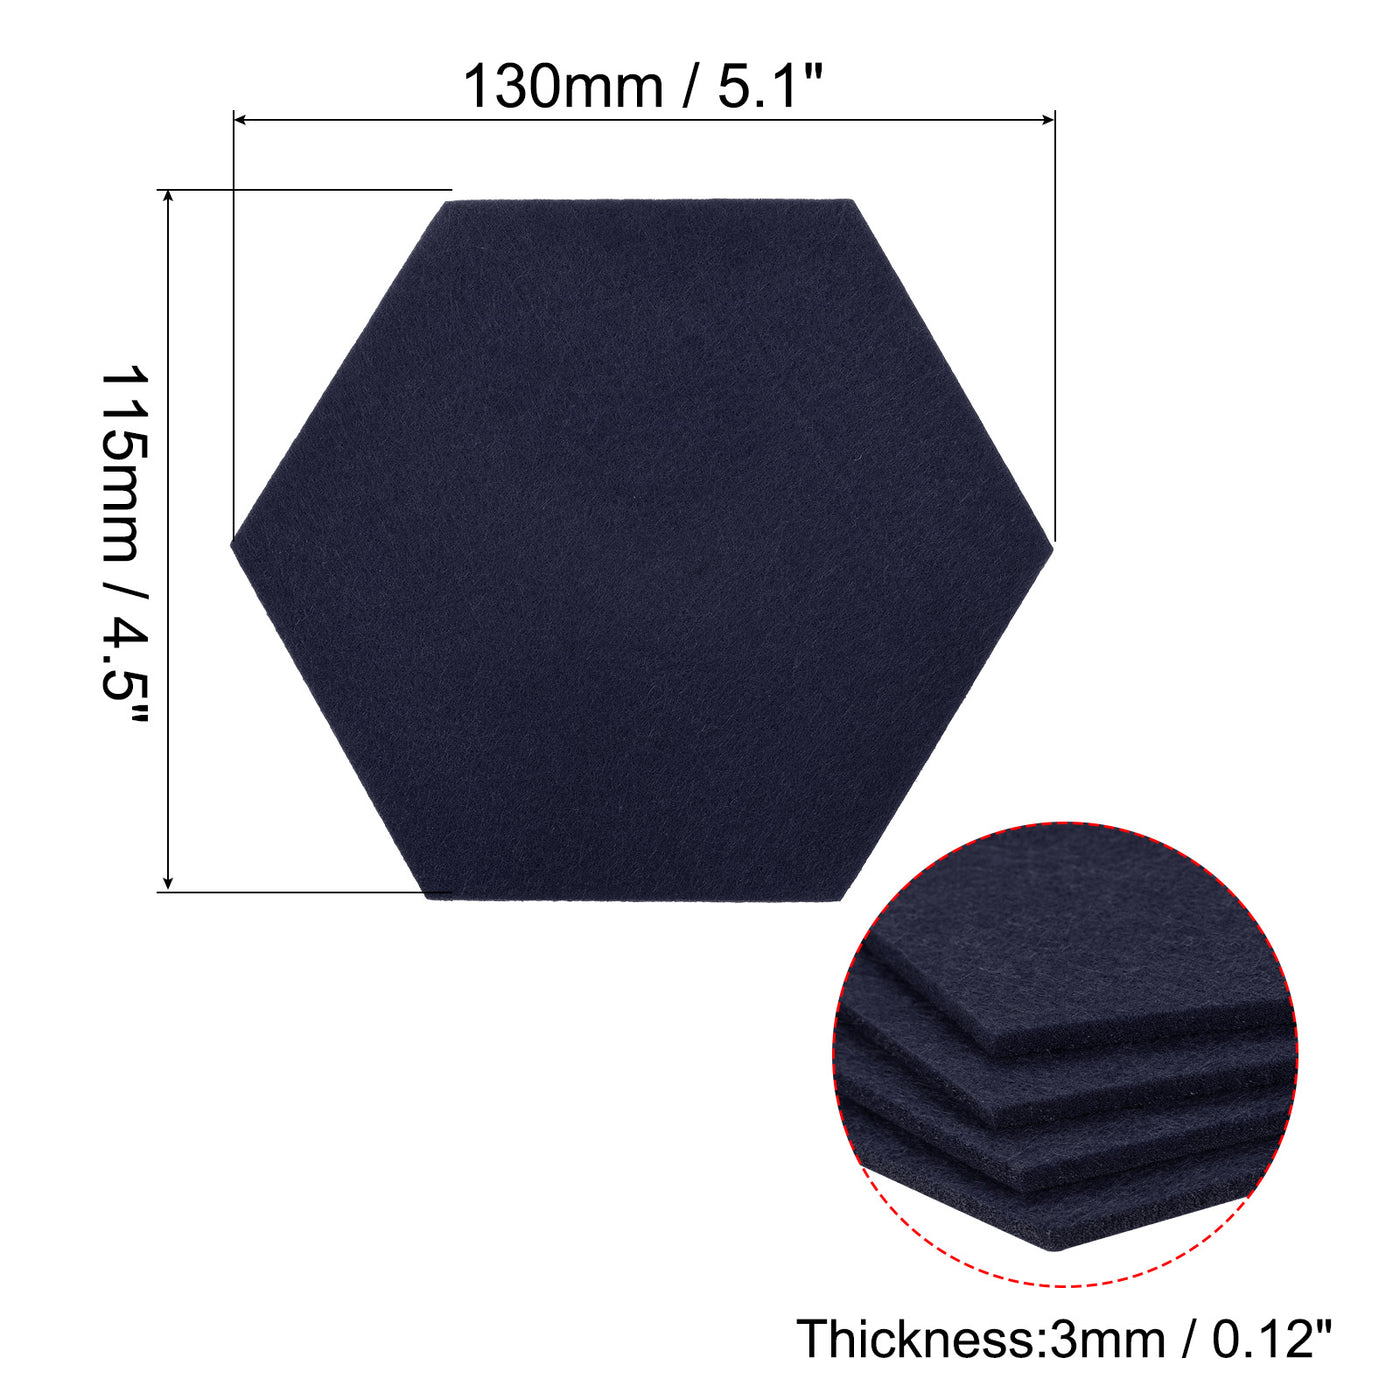 uxcell Uxcell Felt Coasters 9pcs Absorbent Pad Coaster for Drink Cup Pot Bowl Vase Dark Blue